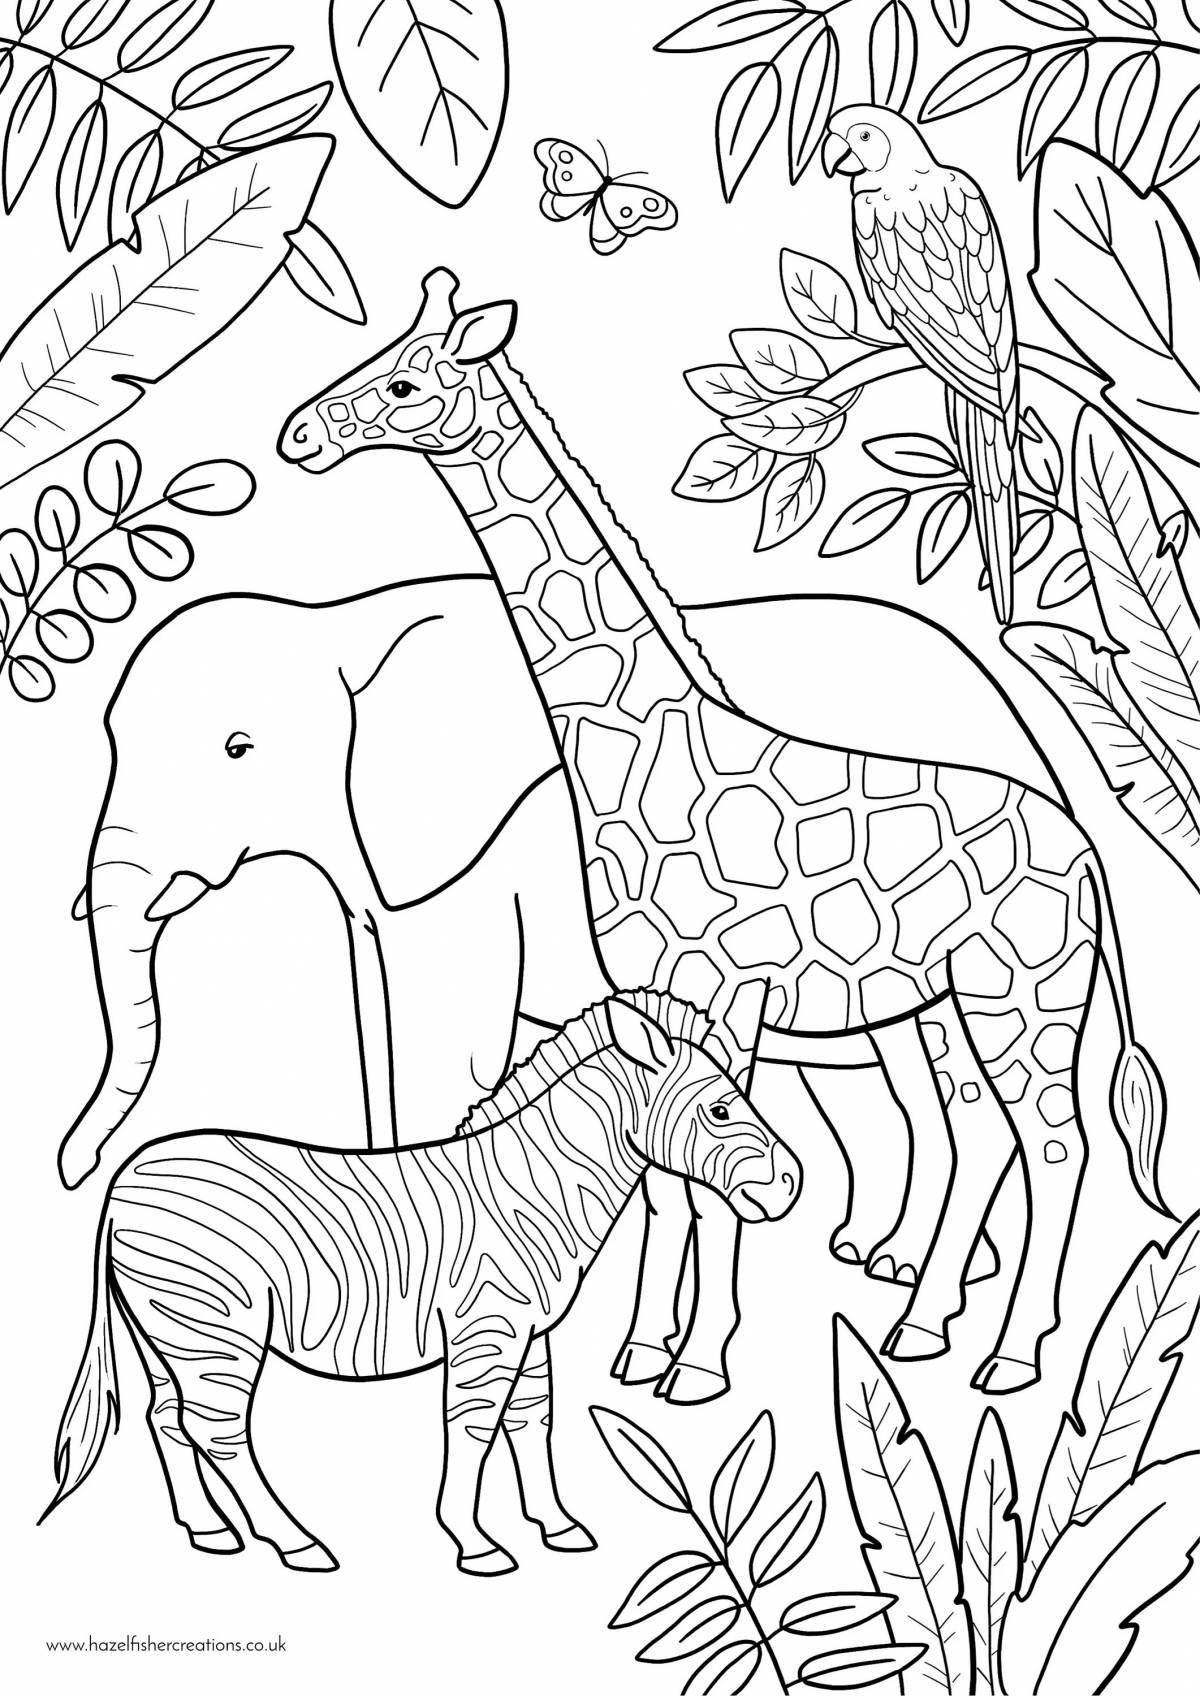 Fun coloring pages animals Grade 1